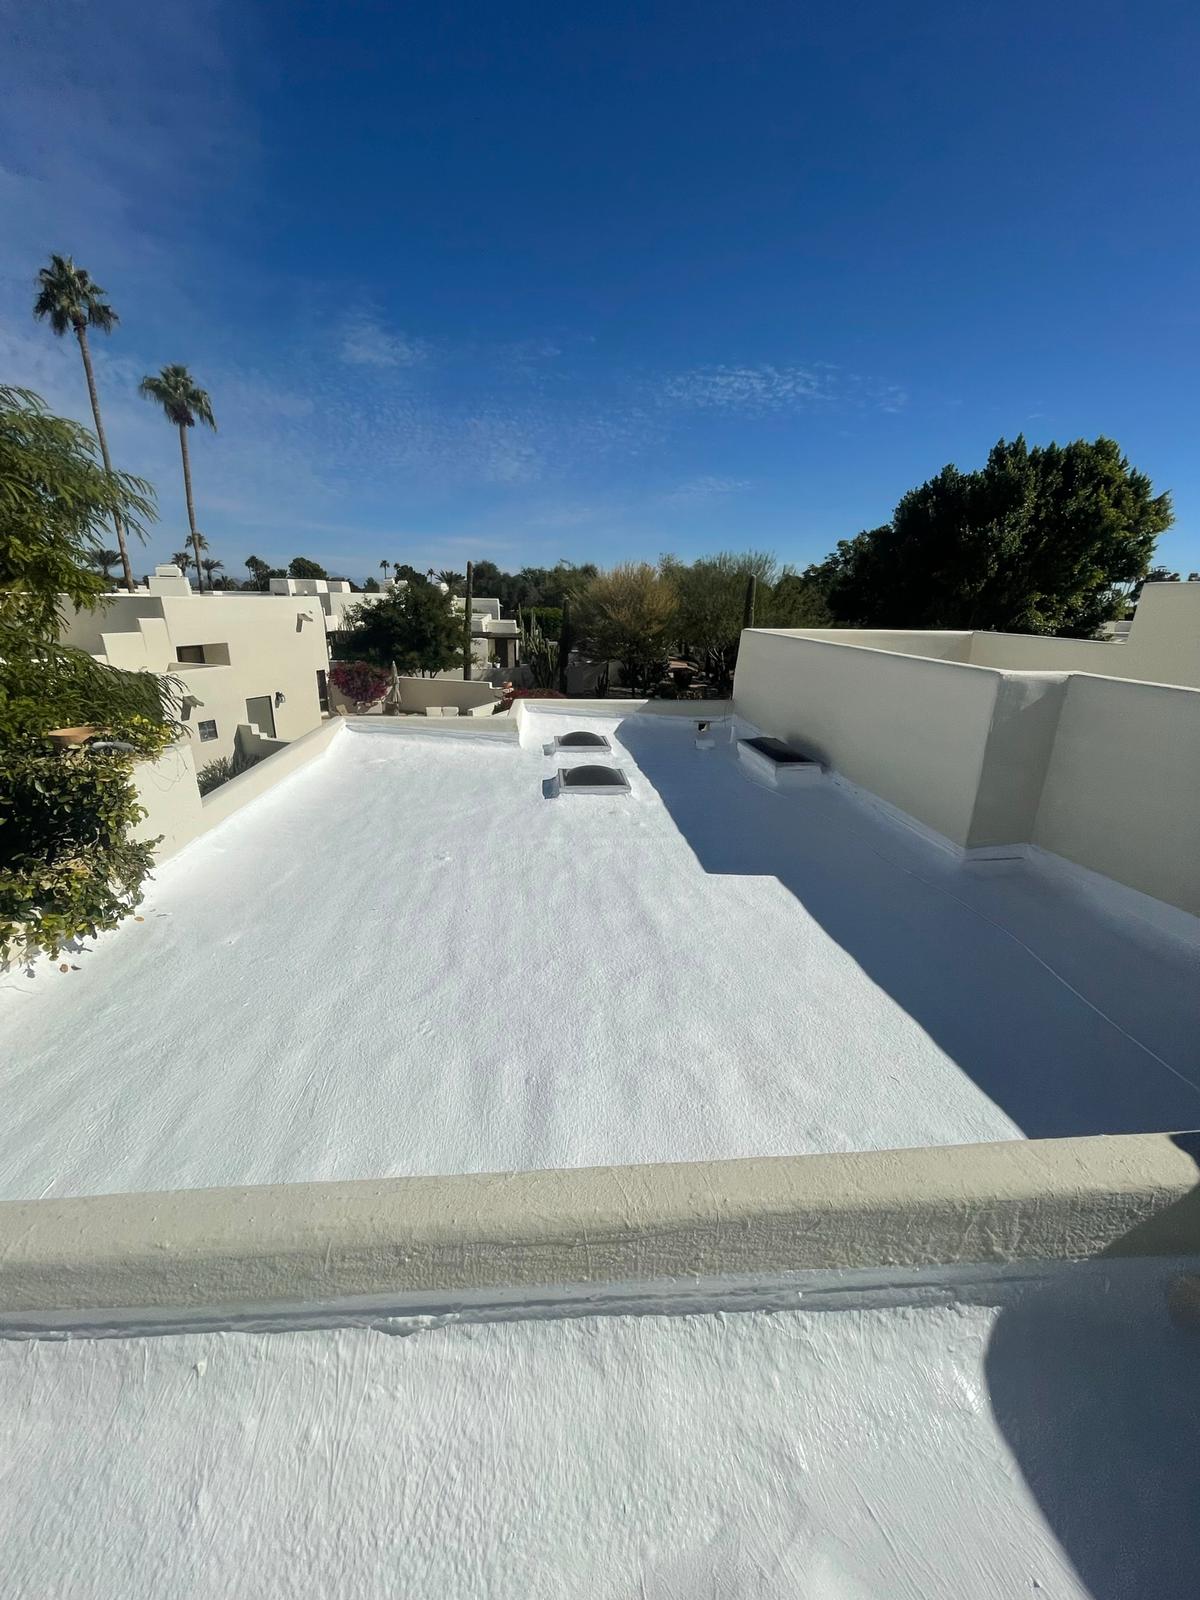 A Desert Mountain flat roof, with spray foam and white coating, provides a clean and modern aesthetic from above.